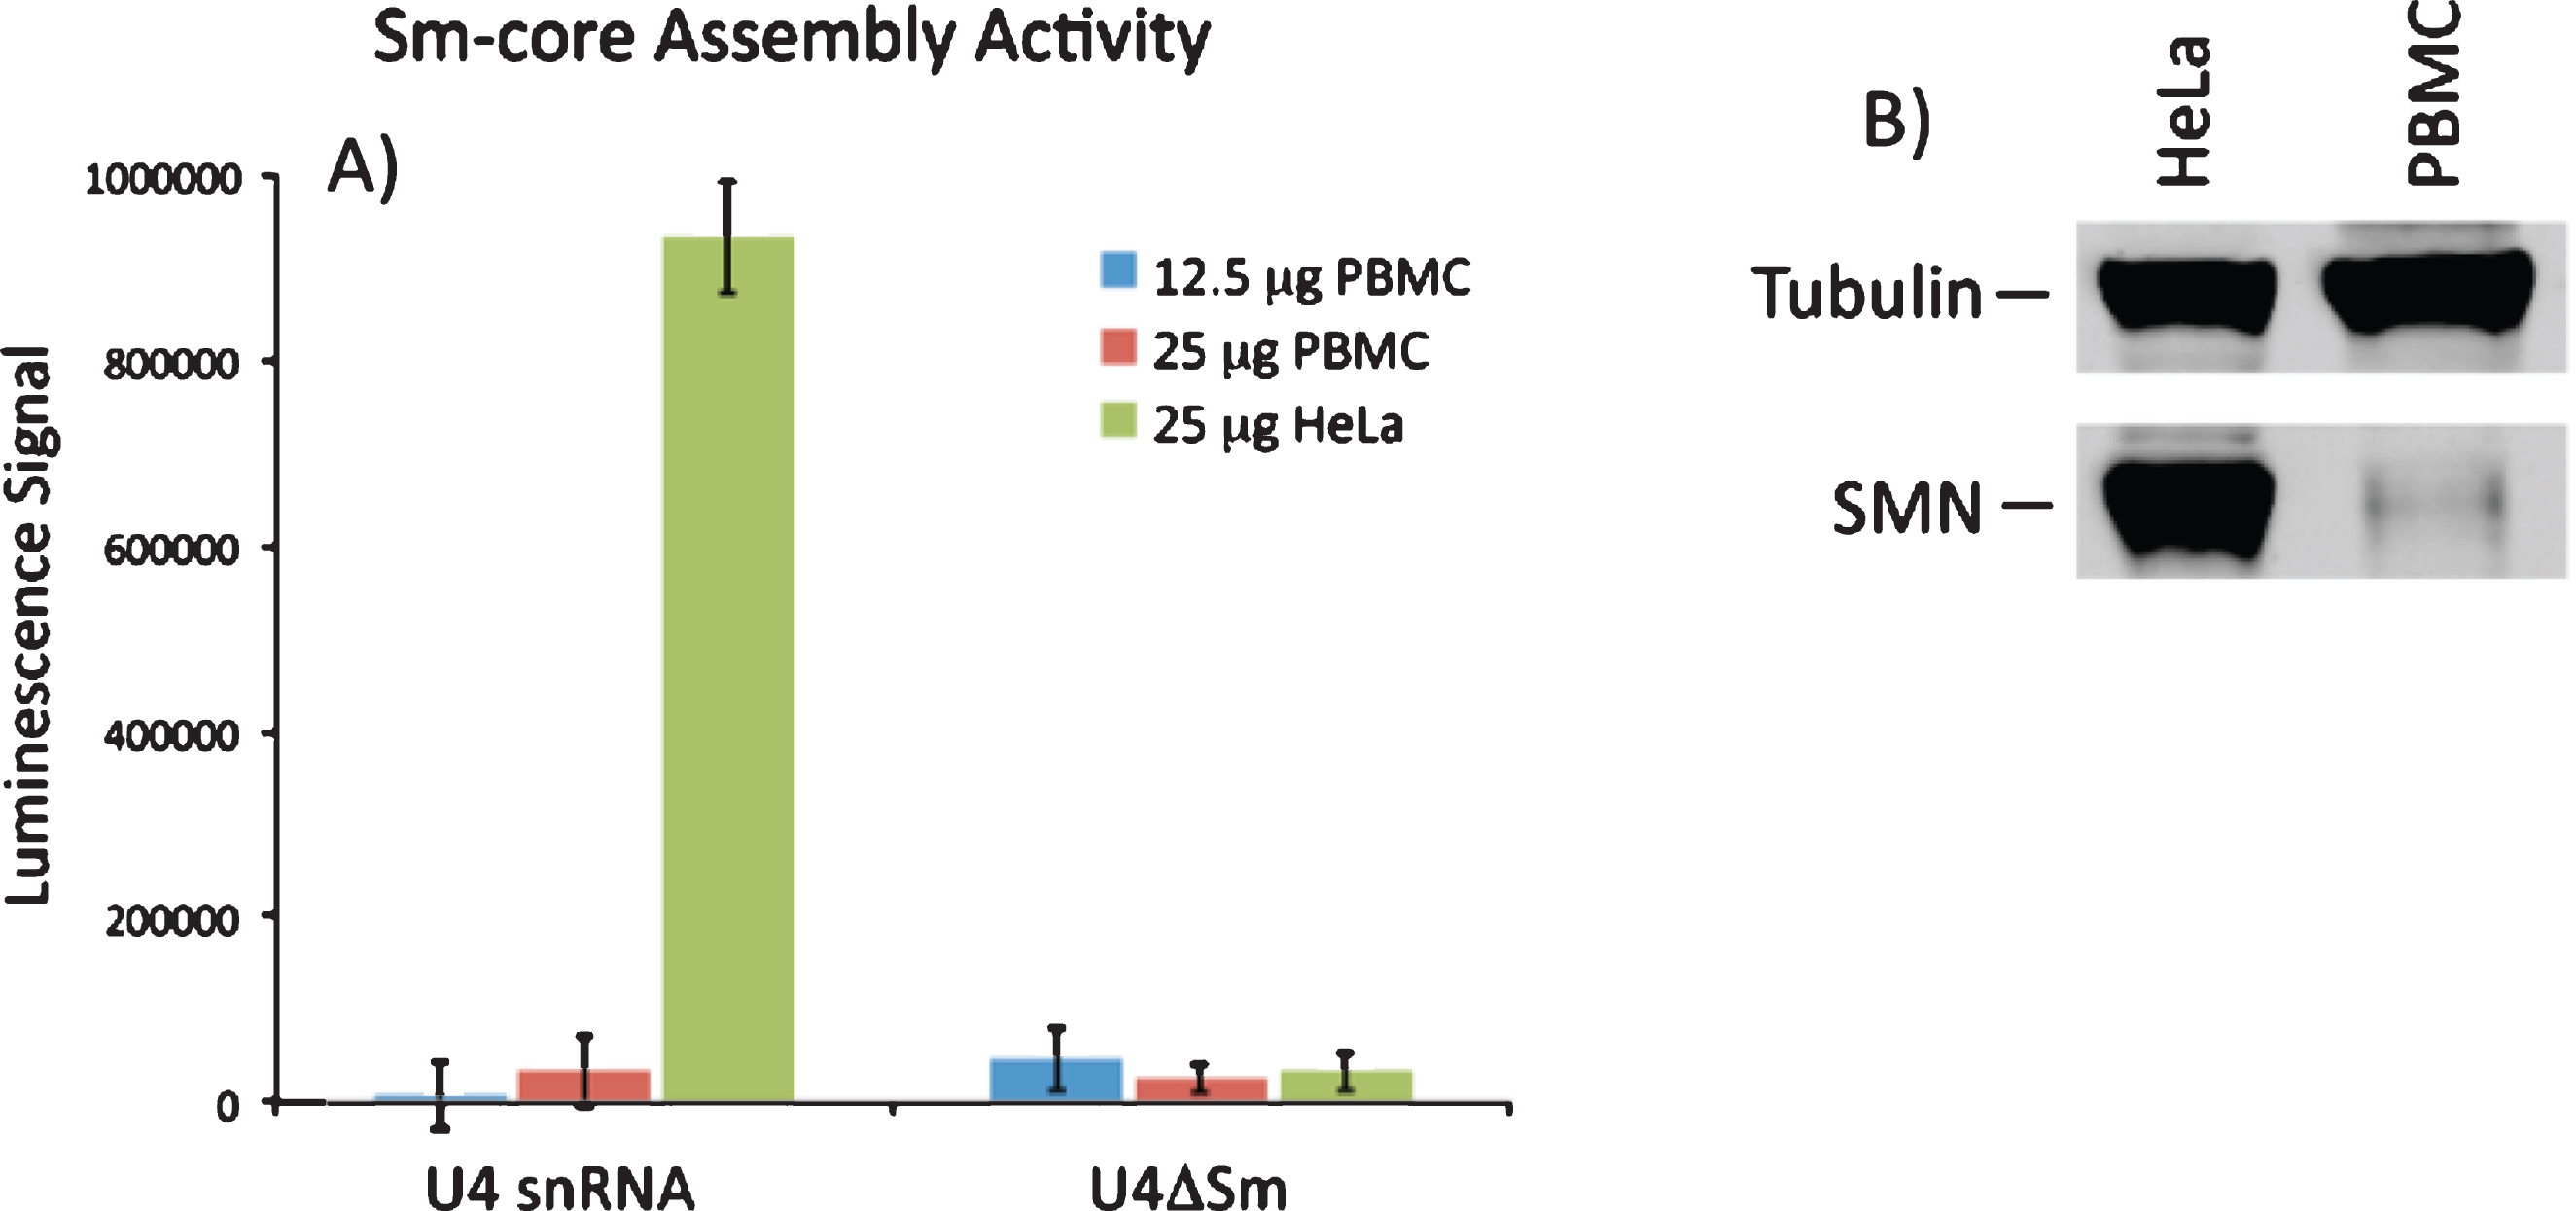 SMN-dependent snRNP assembly activity in PBMCs. A) 12.5 or 25 mg of extract from PBMCs or 25 mg extract from HeLa cells were incubated with biotinylated U4 snRNA or a variant of U4 lacking the Sm site (U4ΔSm) and assayed for Sm core assembly. Assembled Sm cores were isolated by immunoprecipitation with anti-Sm antibodies and detected via luminescence with HRP-coupled streptavidin. The error bars represent the standard deviation from the mean of three independent experiments. B) Representative Western blot for SMN protein in PBMC and HeLa extracts used in snRNP assembly experiments.